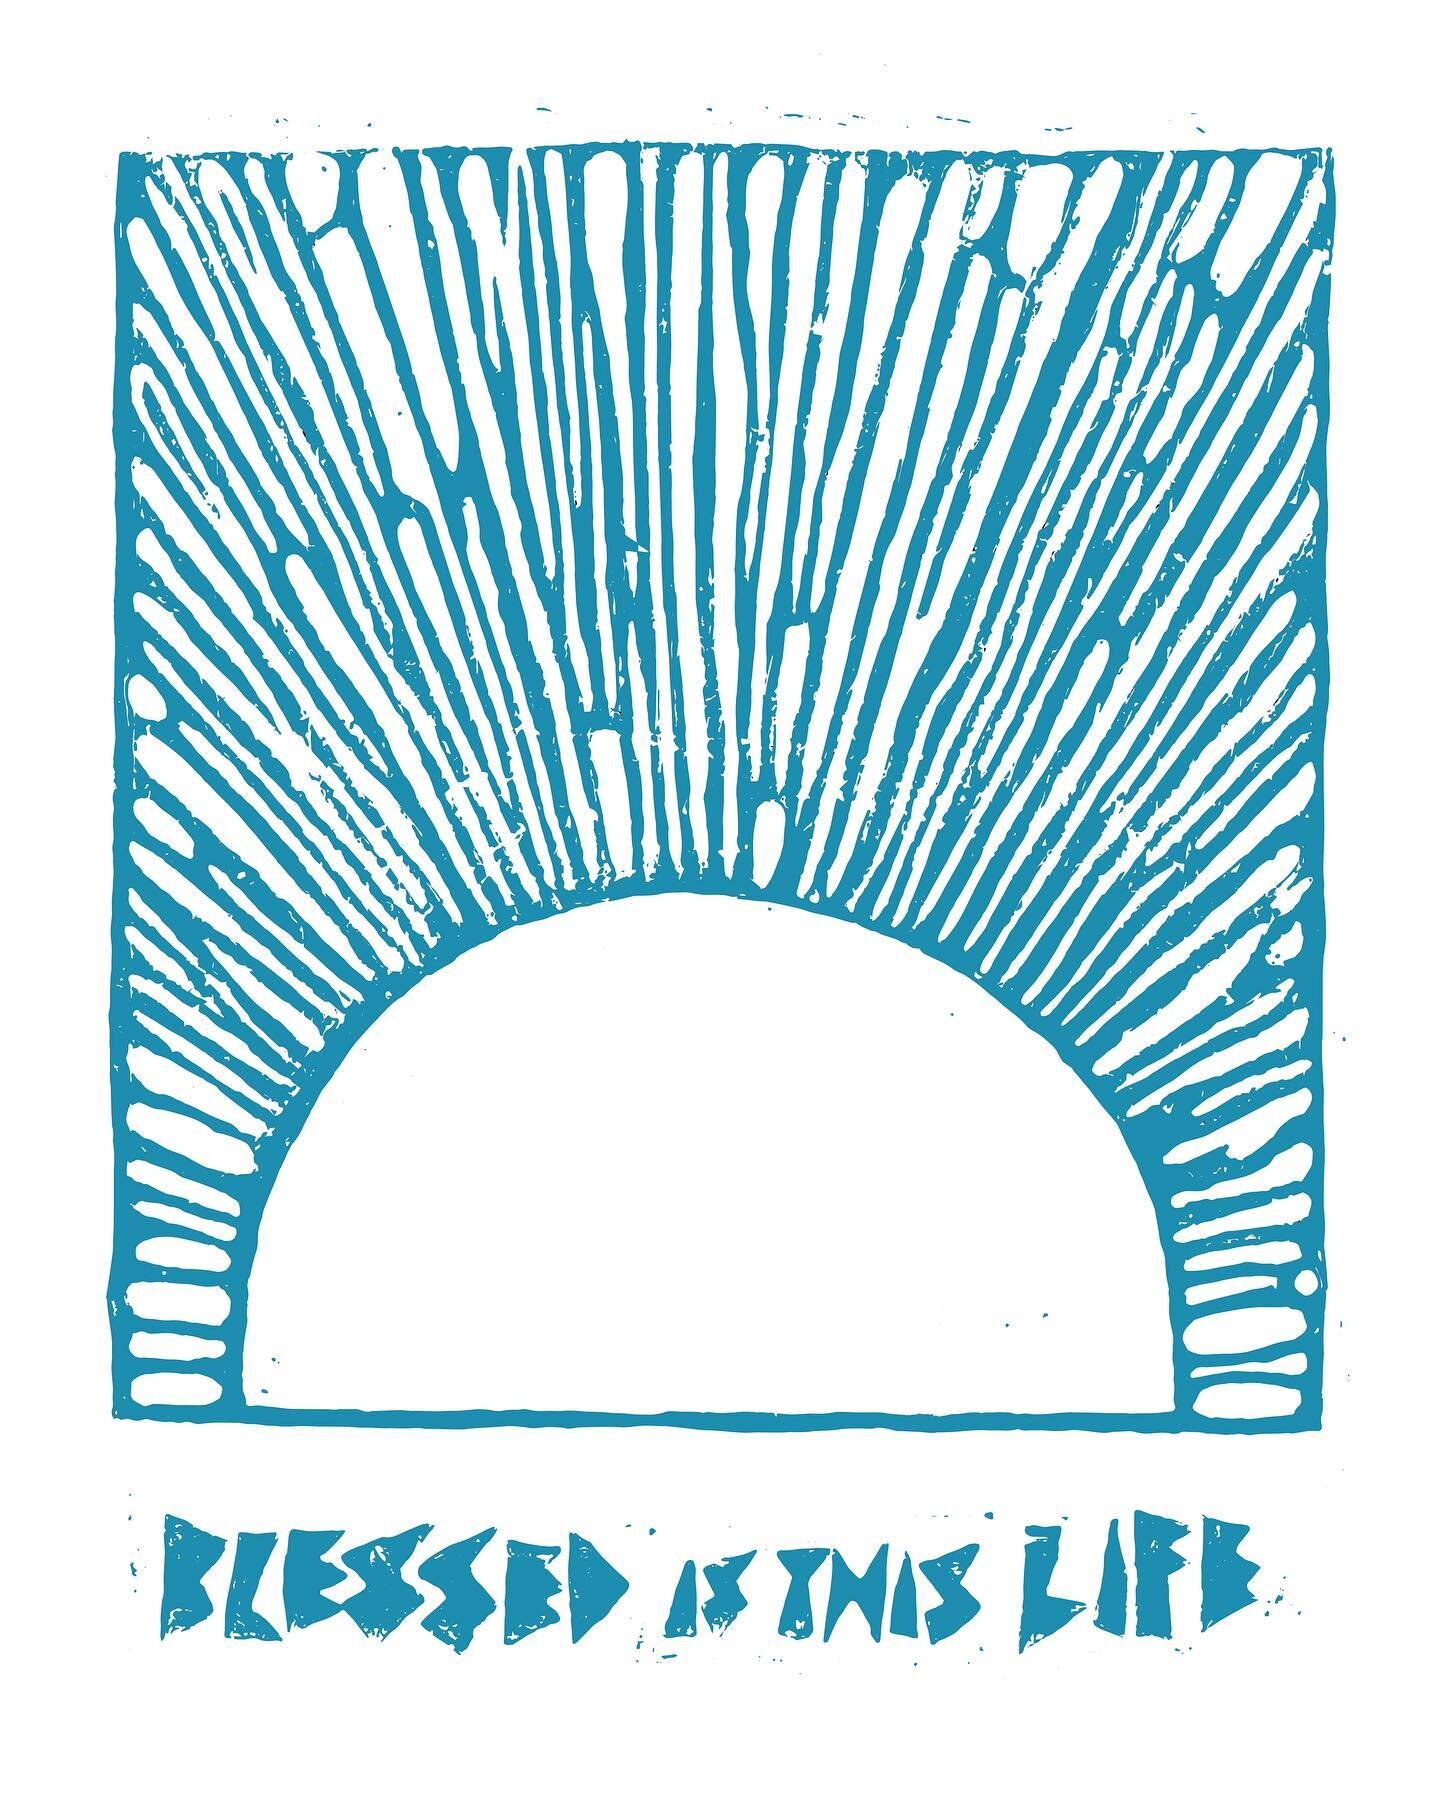 Black Friday starts early! Head on over to our site to snag 20% off select items, like this cool linoleum print. Because &ldquo;Blessed is this life and I&rsquo;m gonna celebrate being alive!&rdquo;